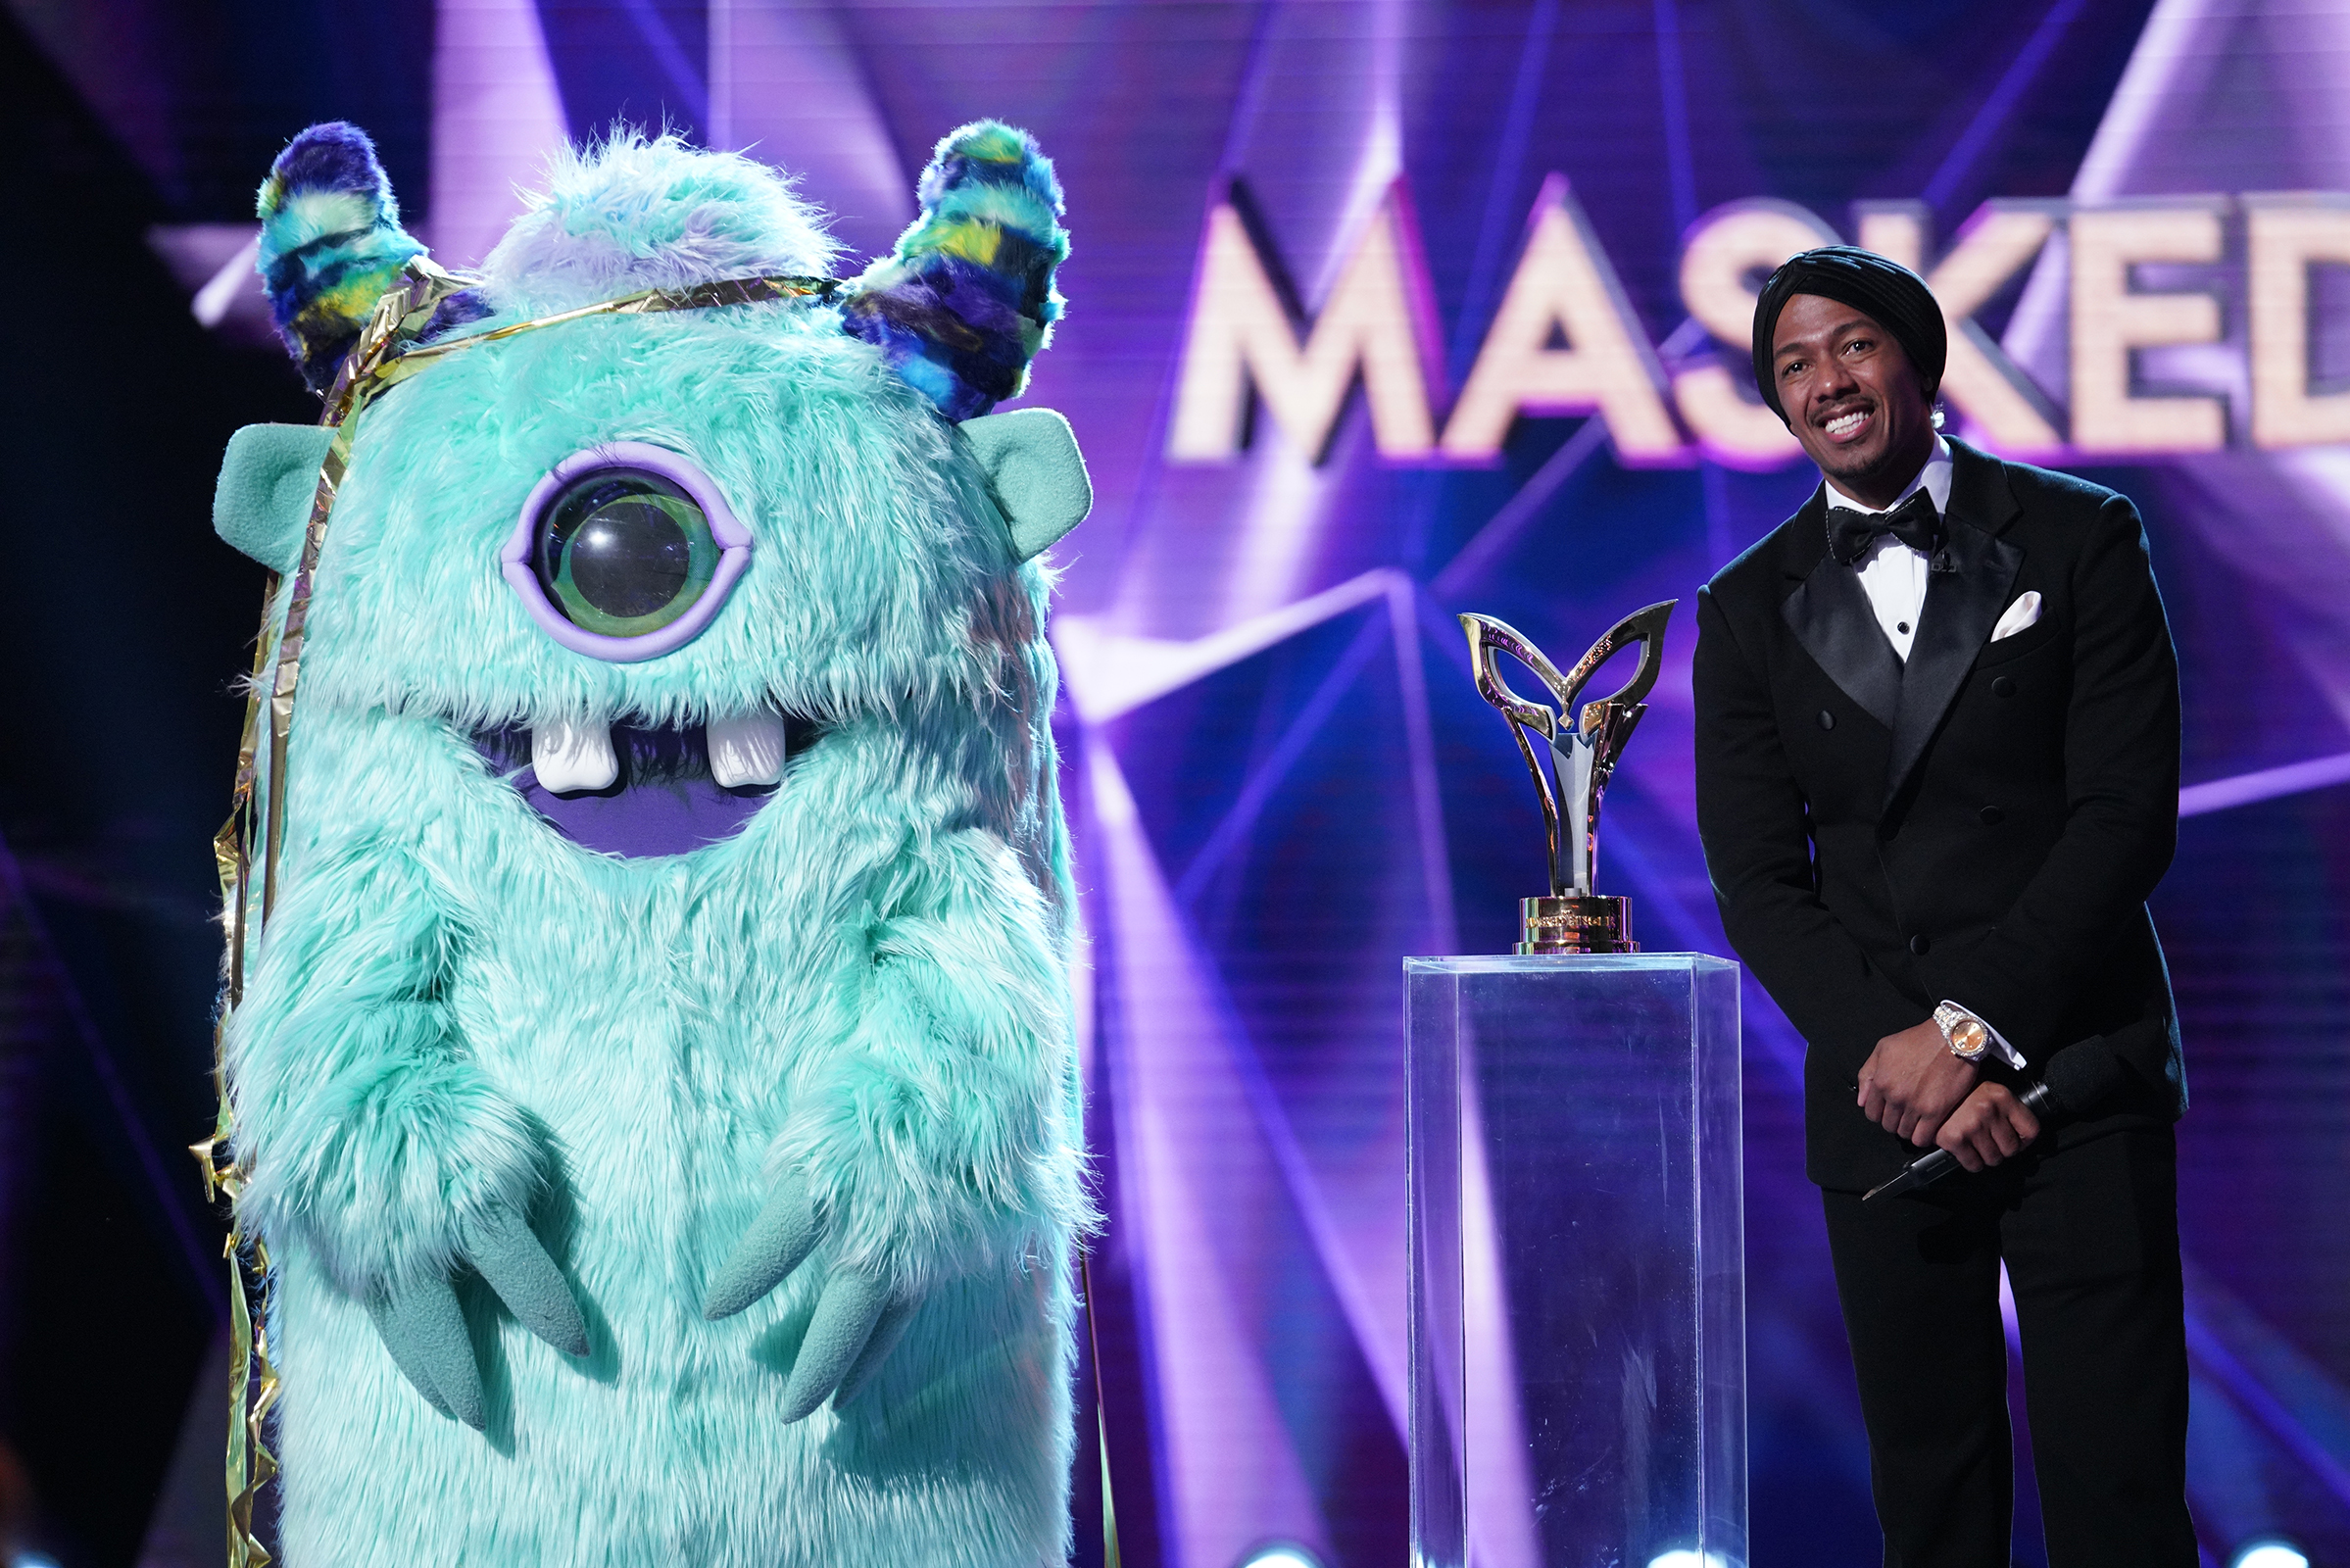 Monster and Nick Cannon, The Masked Singer